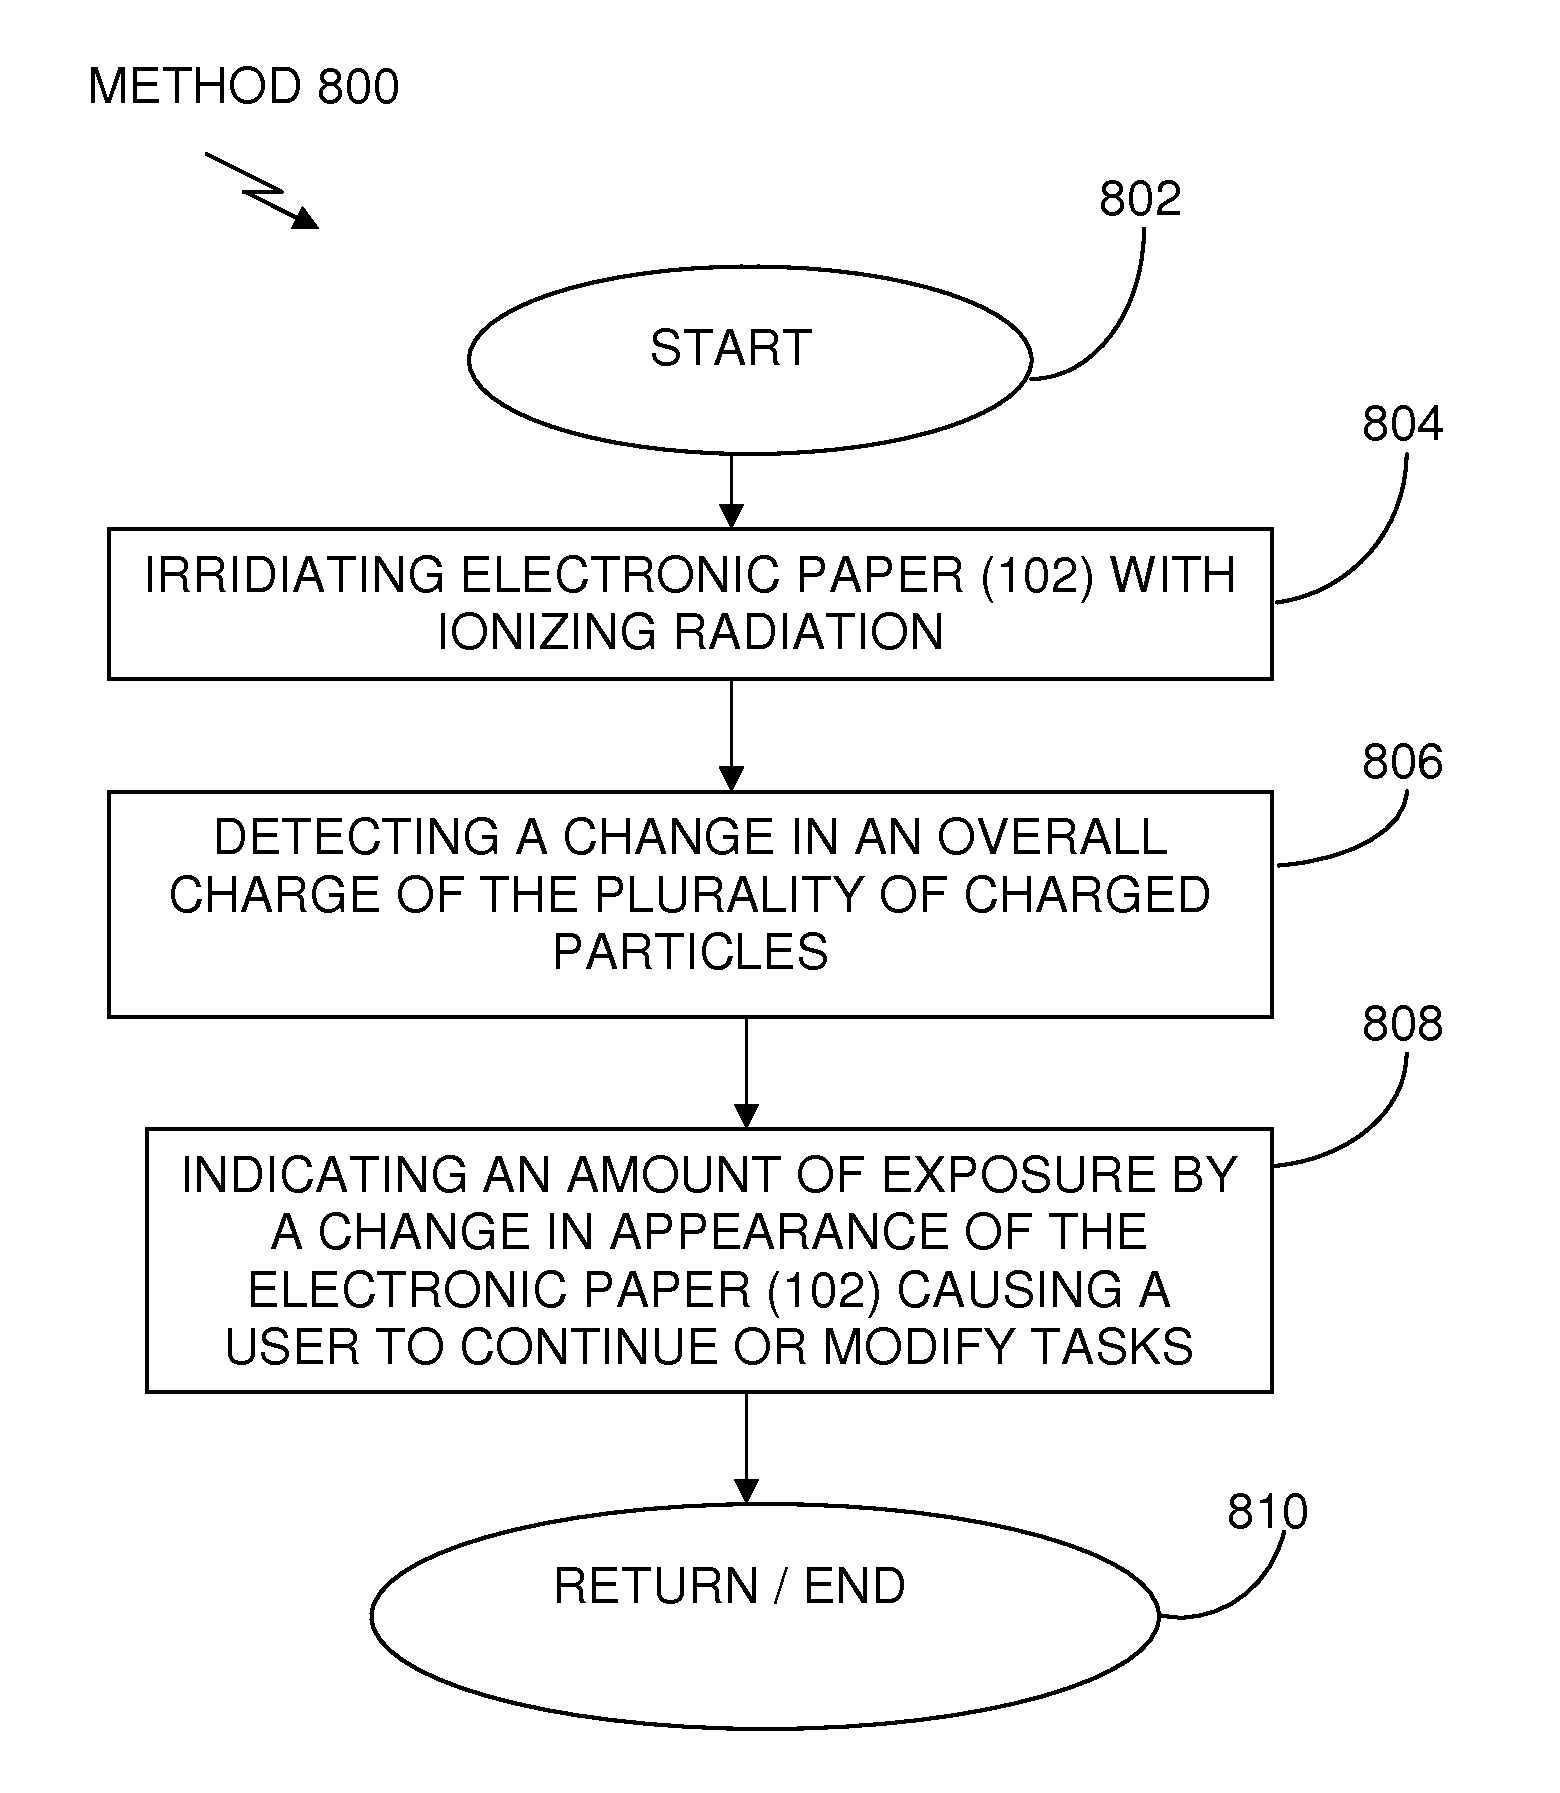 Apparatus systems and methods of sensing chemical bio-chemical and radiological agents using electrophoretic displays